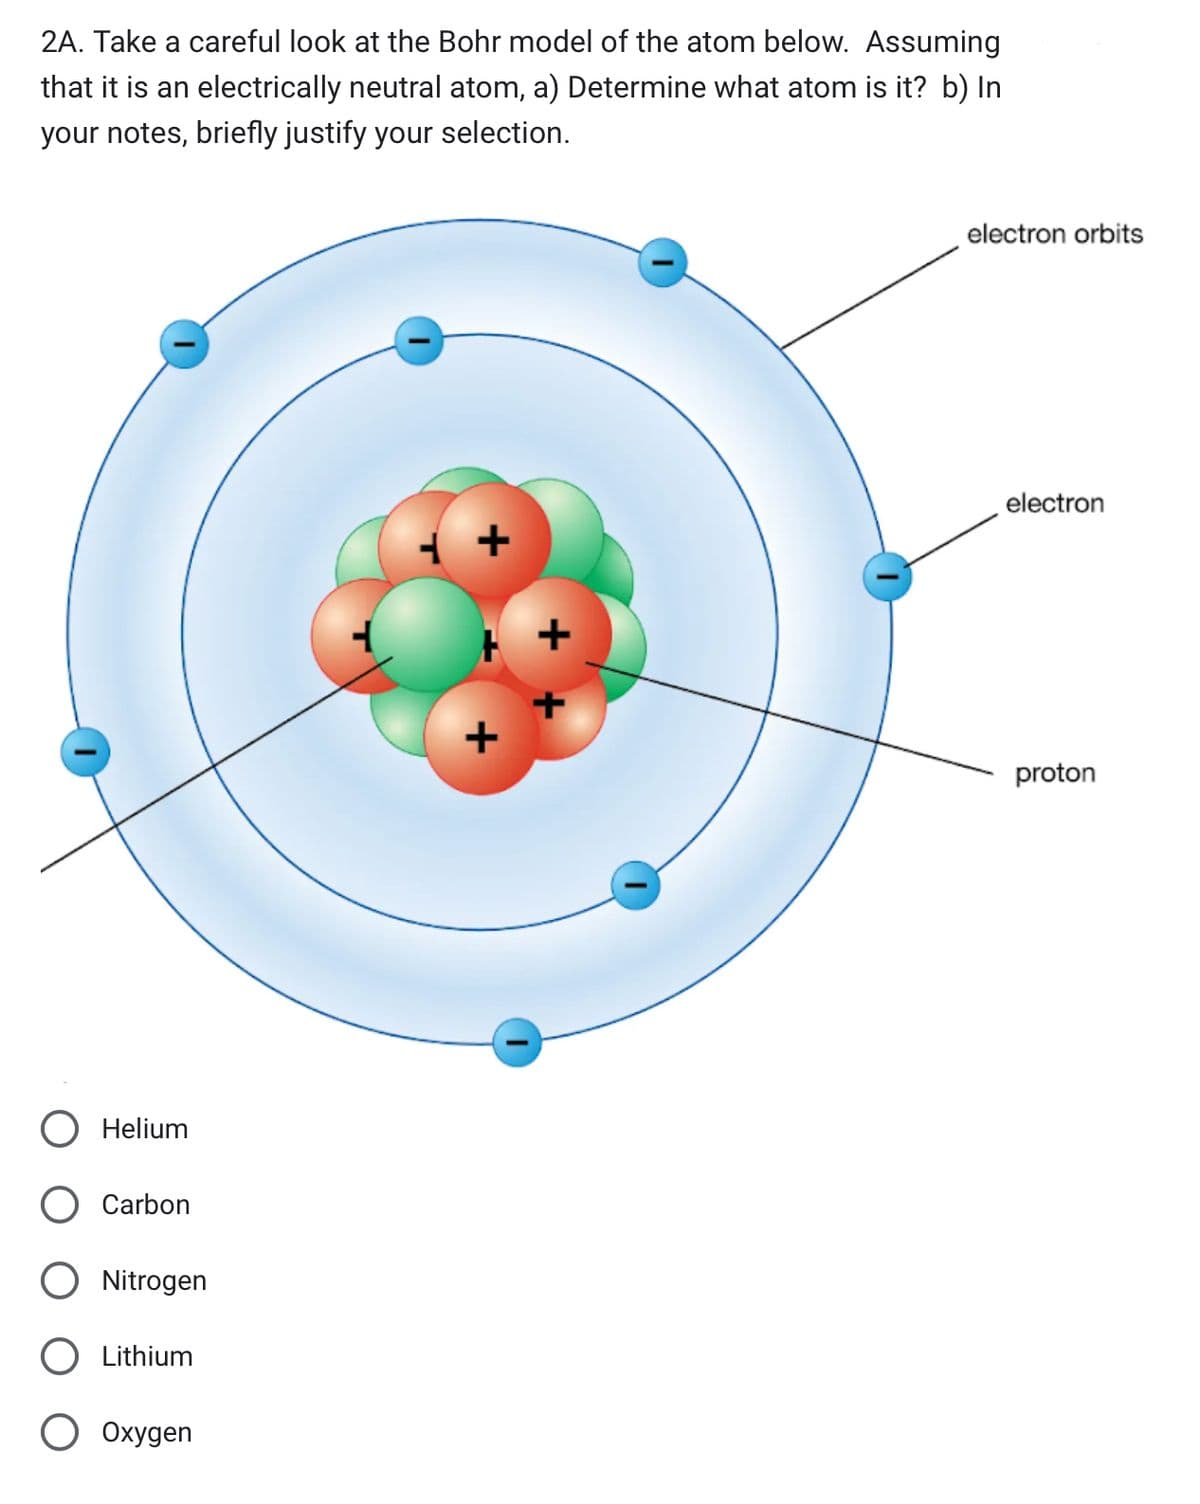 2A. Take a careful look at the Bohr model of the atom below. Assuming
that it is an electrically neutral atom, a) Determine what atom is it? b) In
your notes, briefly justify your selection.
Helium
Carbon
Nitrogen
Lithium
Oxygen
+
+
electron orbits
electron
proton